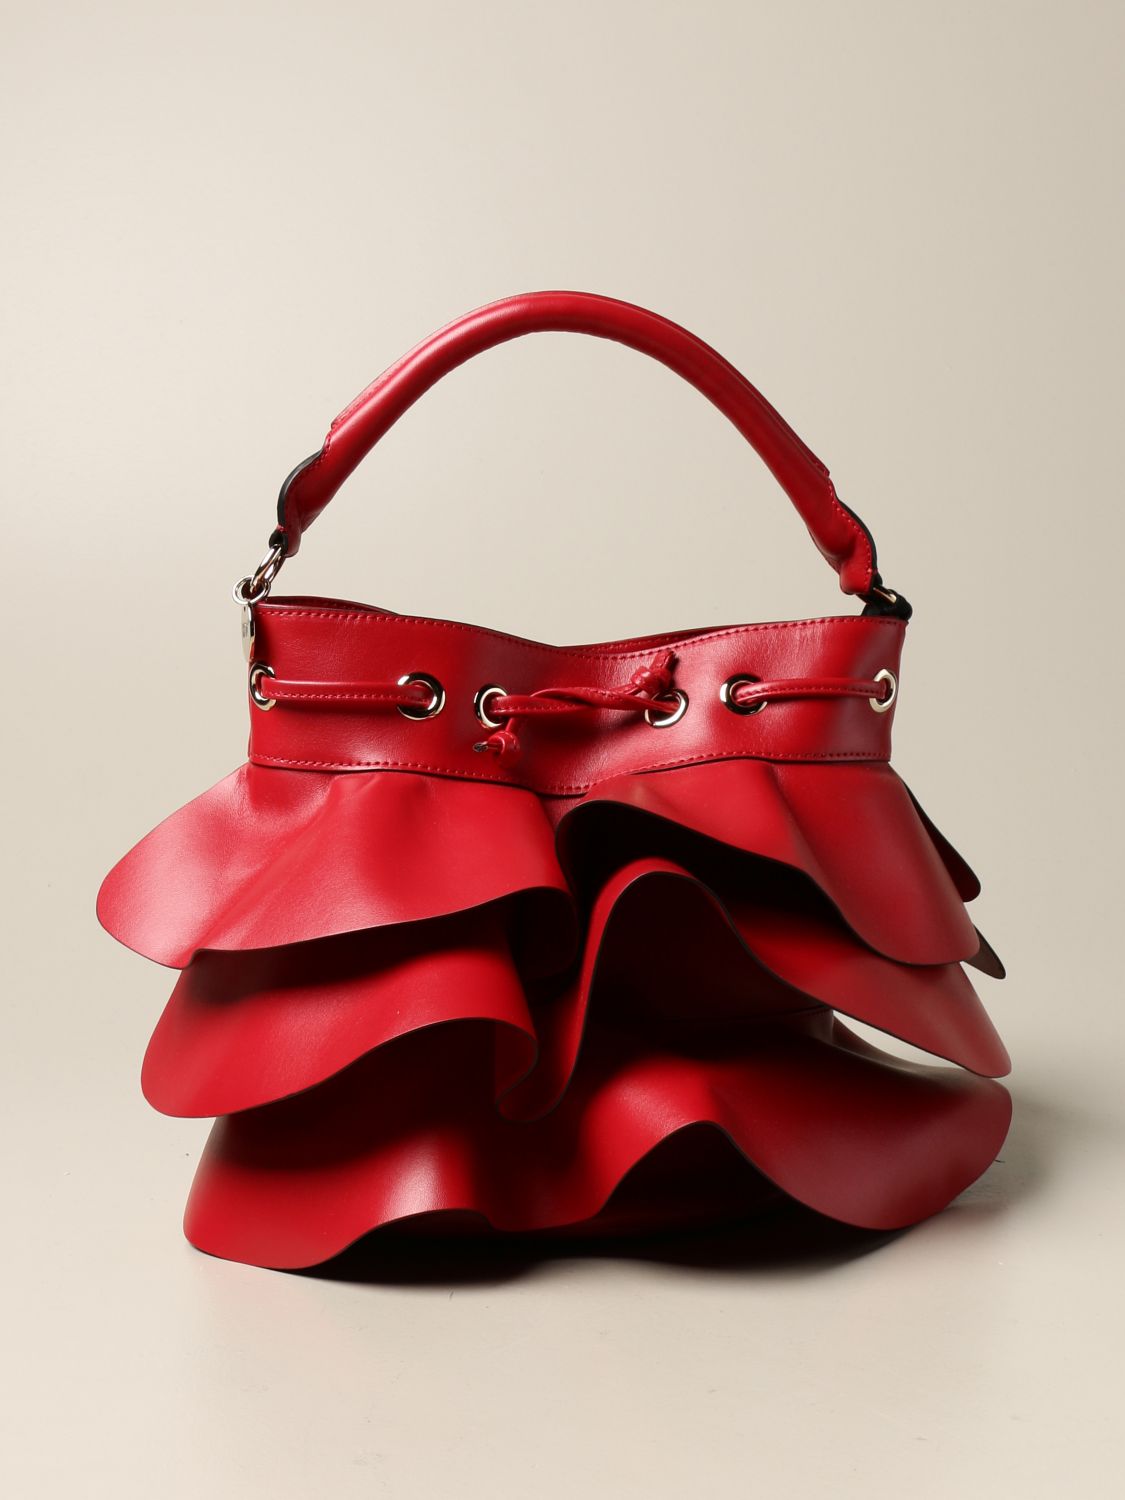 Rock Ruffles Red (V) leather bag with ruffles